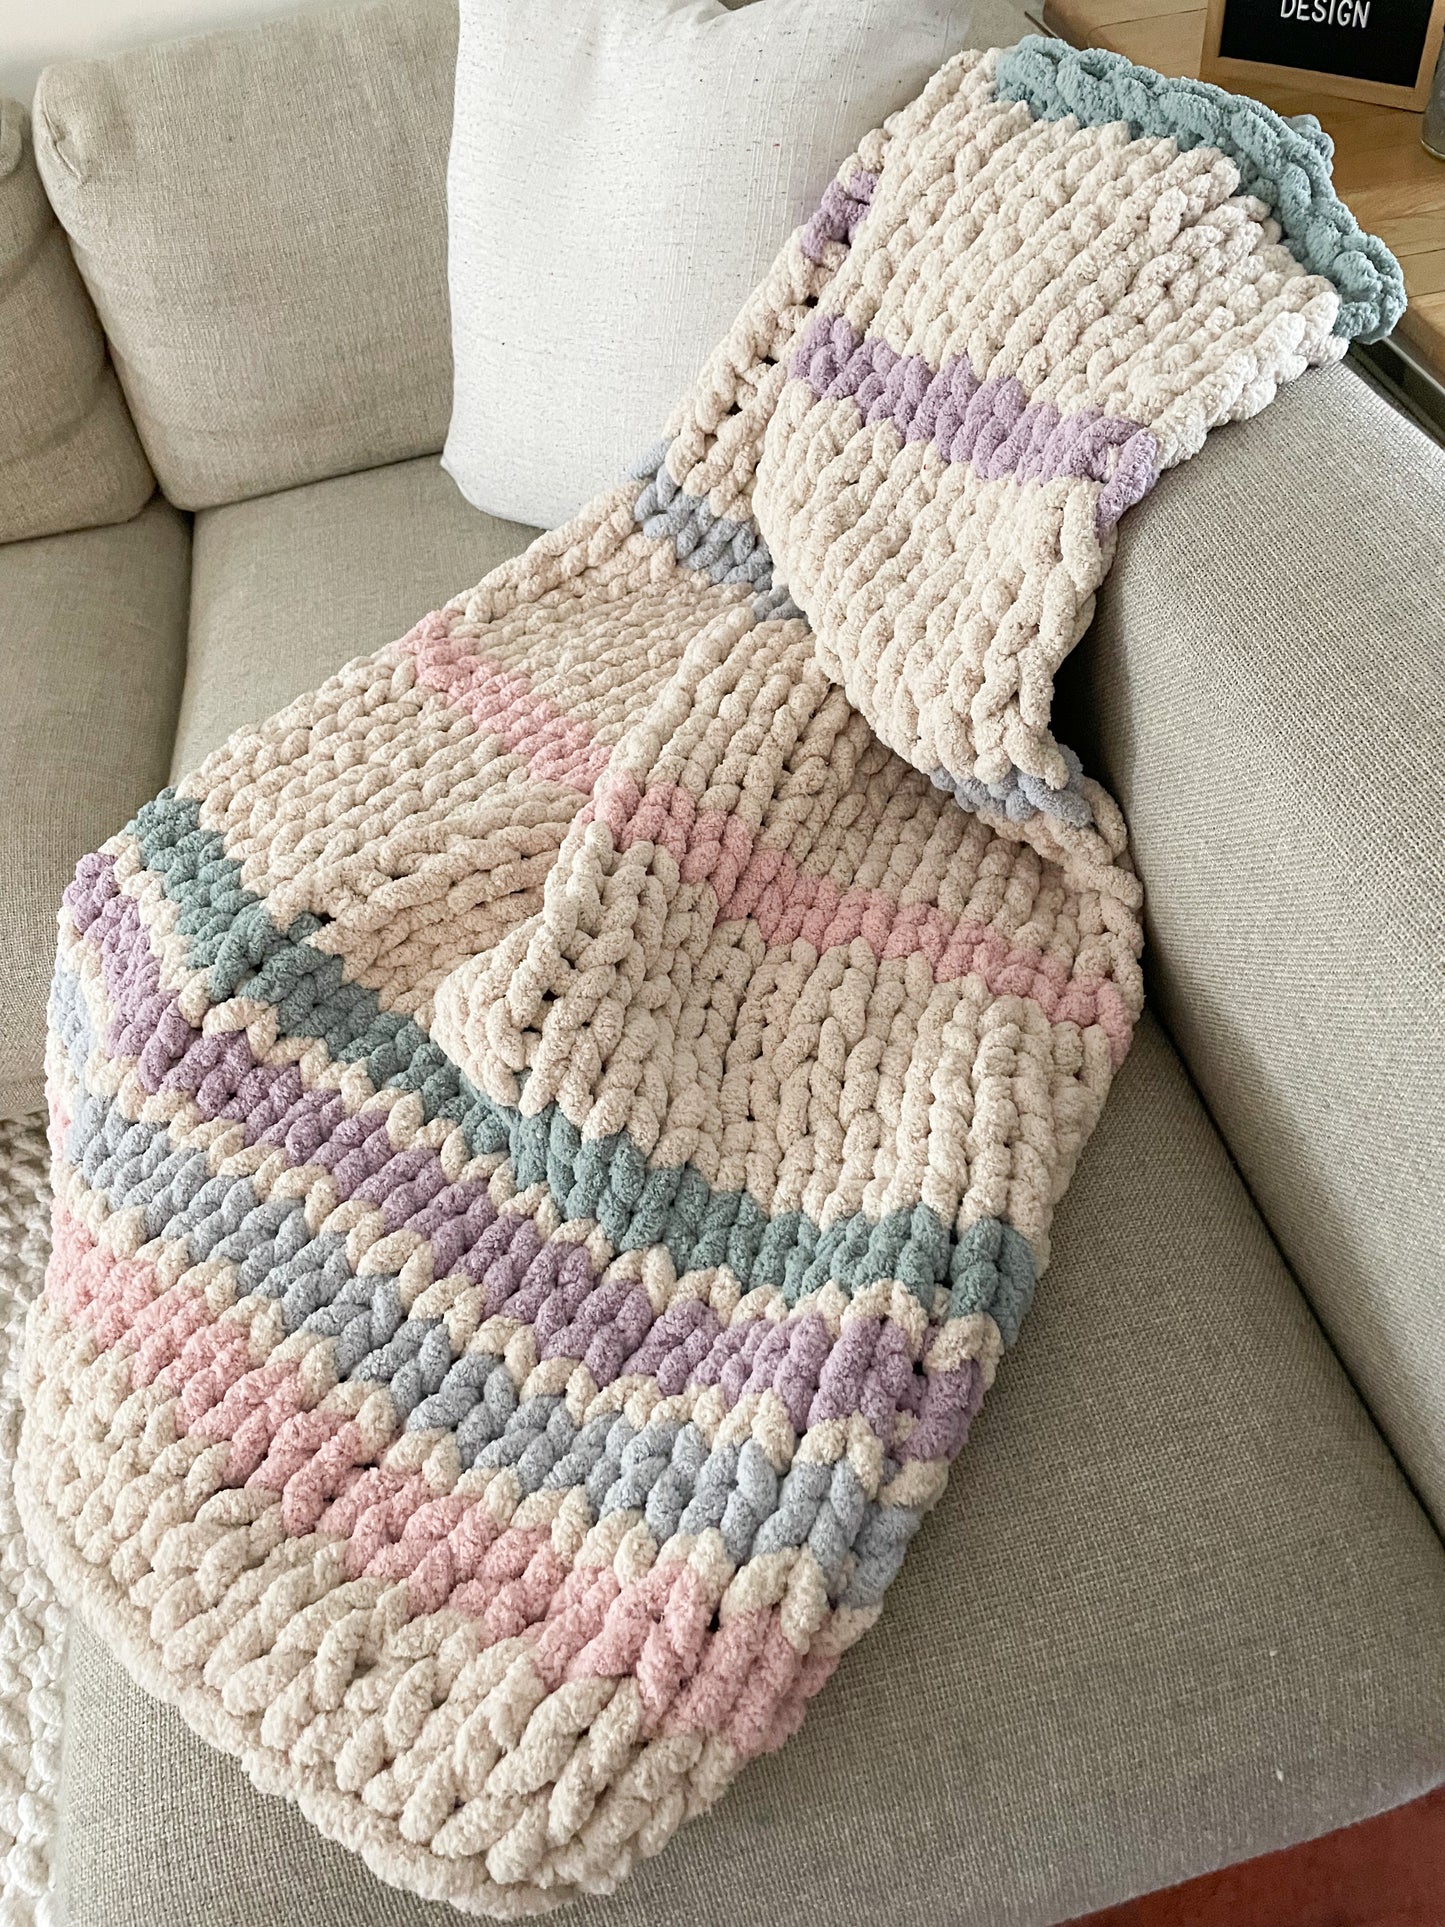 Healing Hand, Chunky Knit "The Avery" Blanket